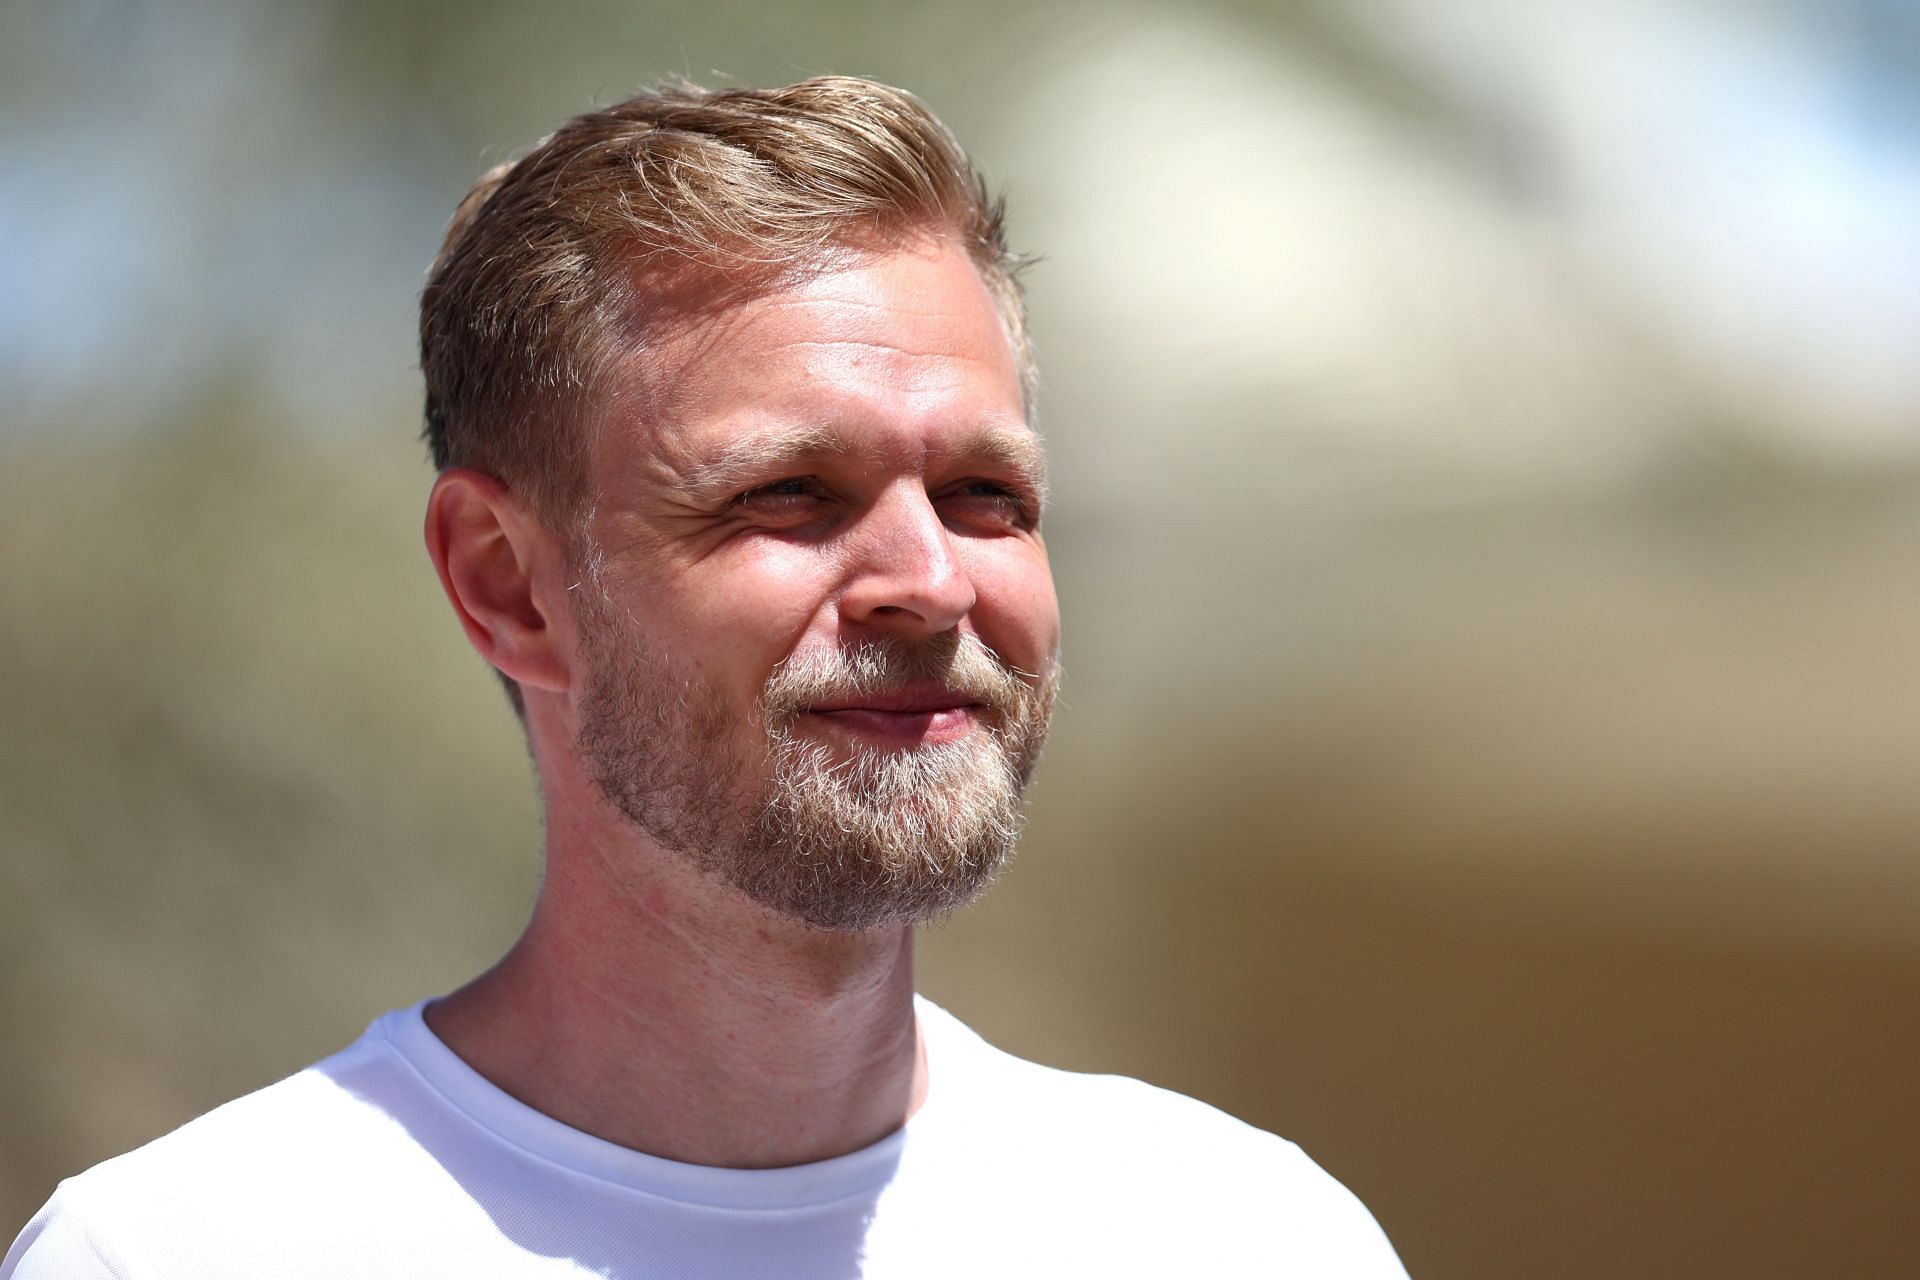 Kevin Magnussen at the F1 Grand Prix of Bahrain - Practice